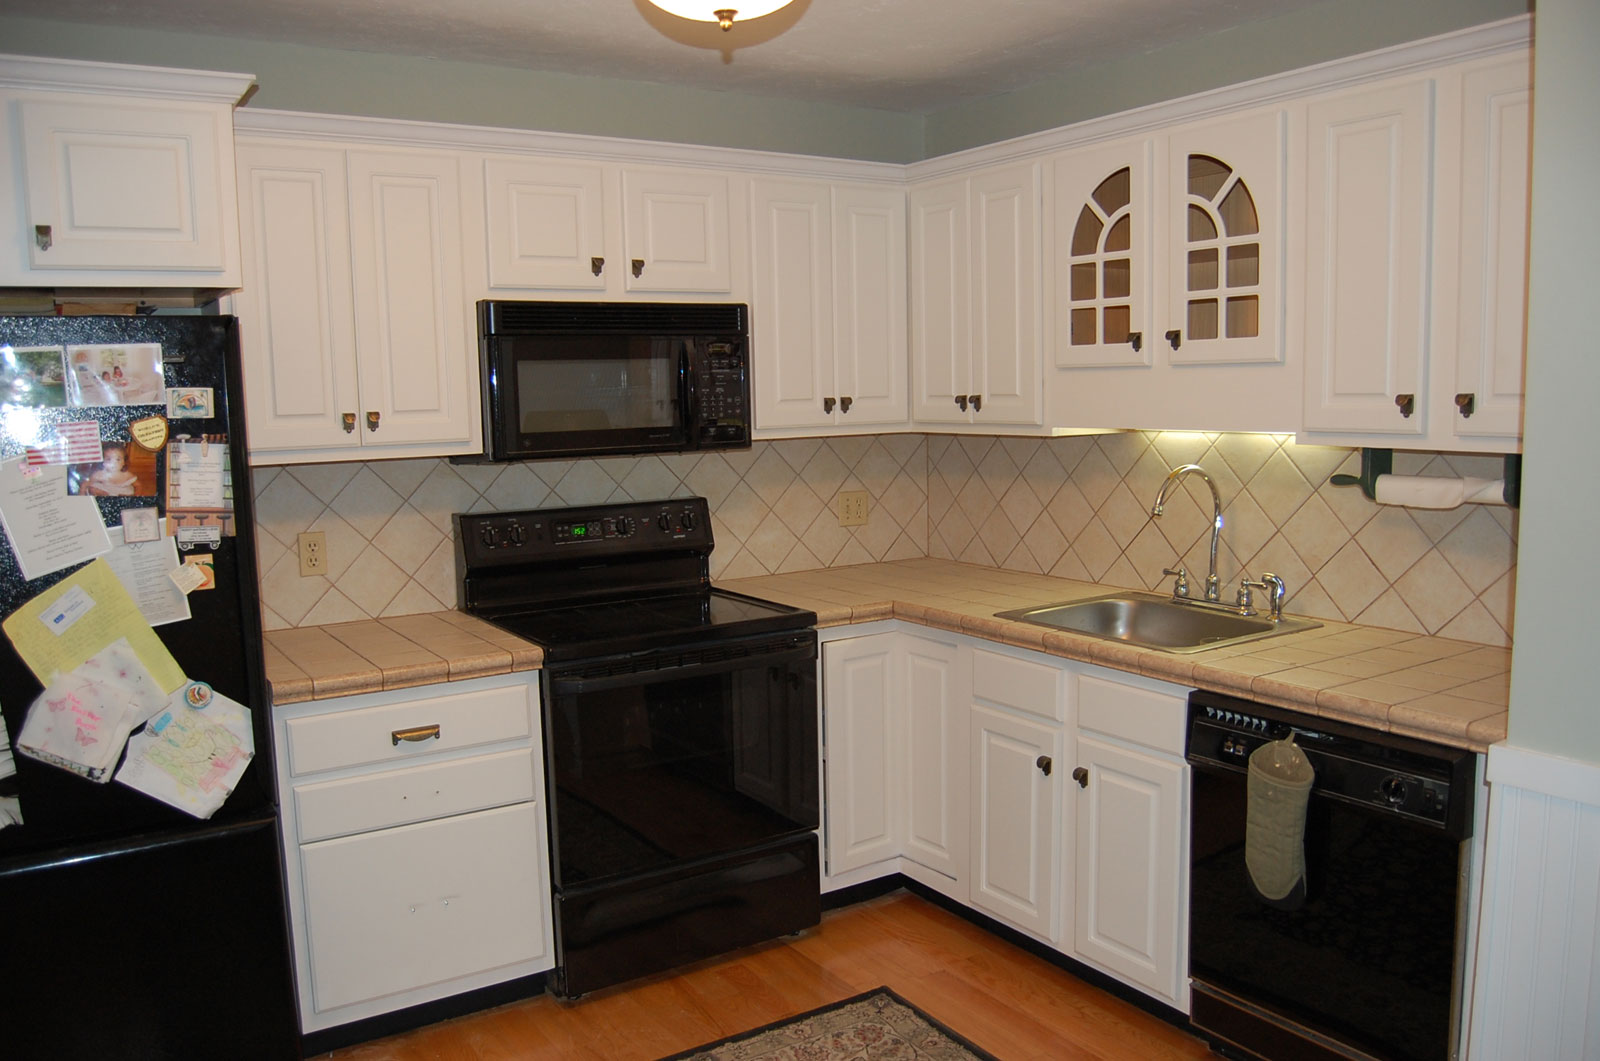 Kitchen Cabinet With White Kitchen Cabinet Refacing Design With Traditional Corner Combined With Cream Kitchen Countertop And Concrete Backsplash Kitchen Kitchen Cabinet Refacing For Totally Different Look